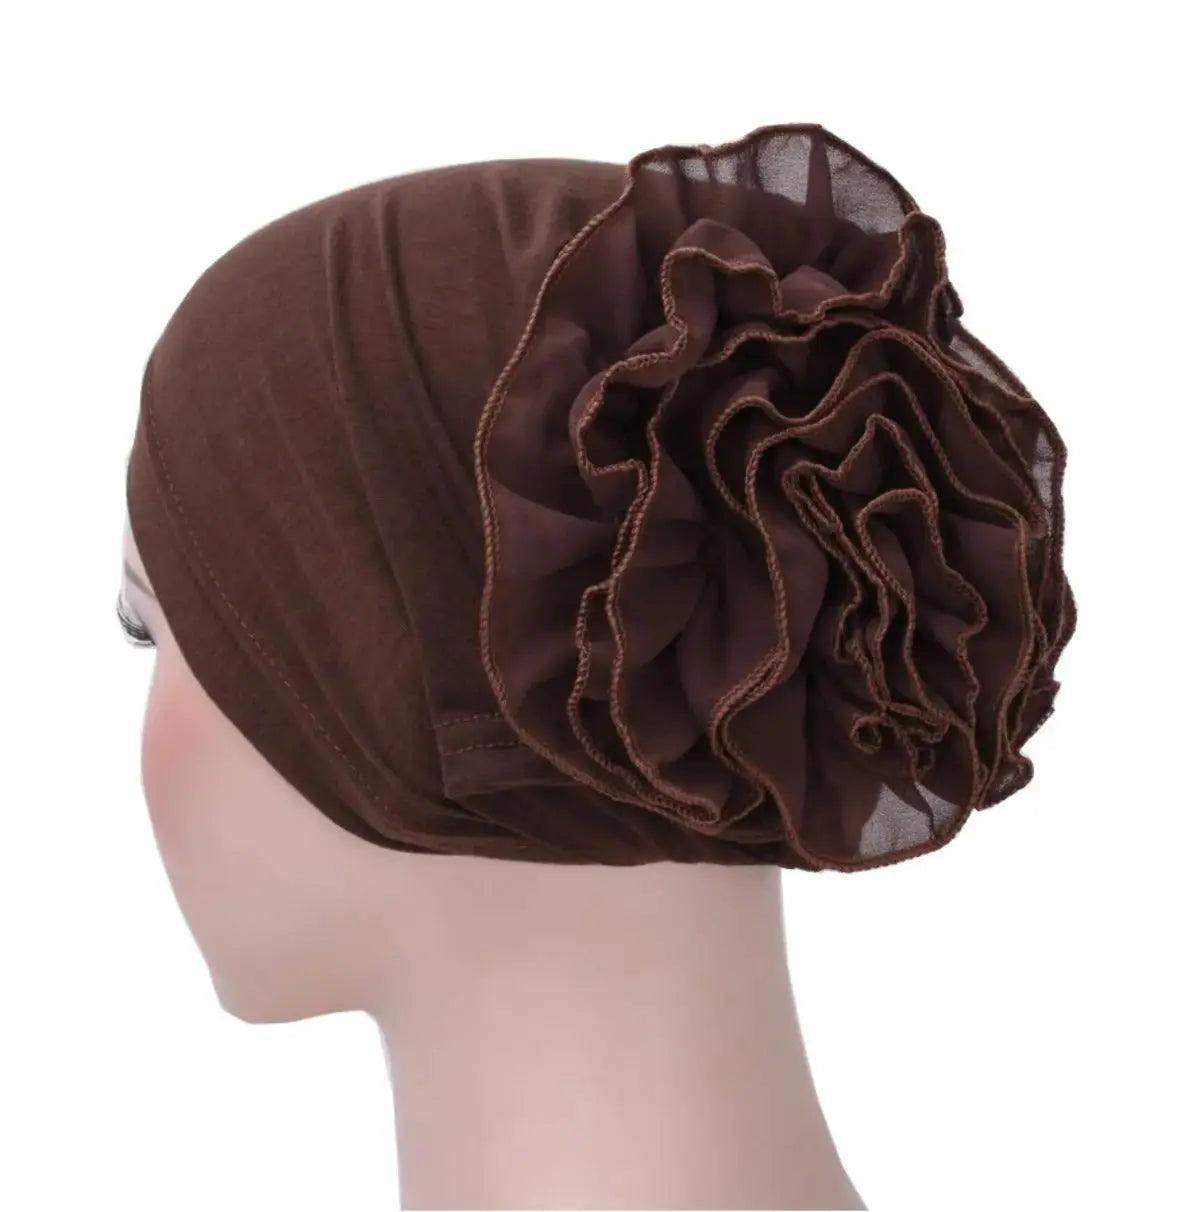 MH032 Chiffon Under Scarf Hijab Cap - Mariam's Collection